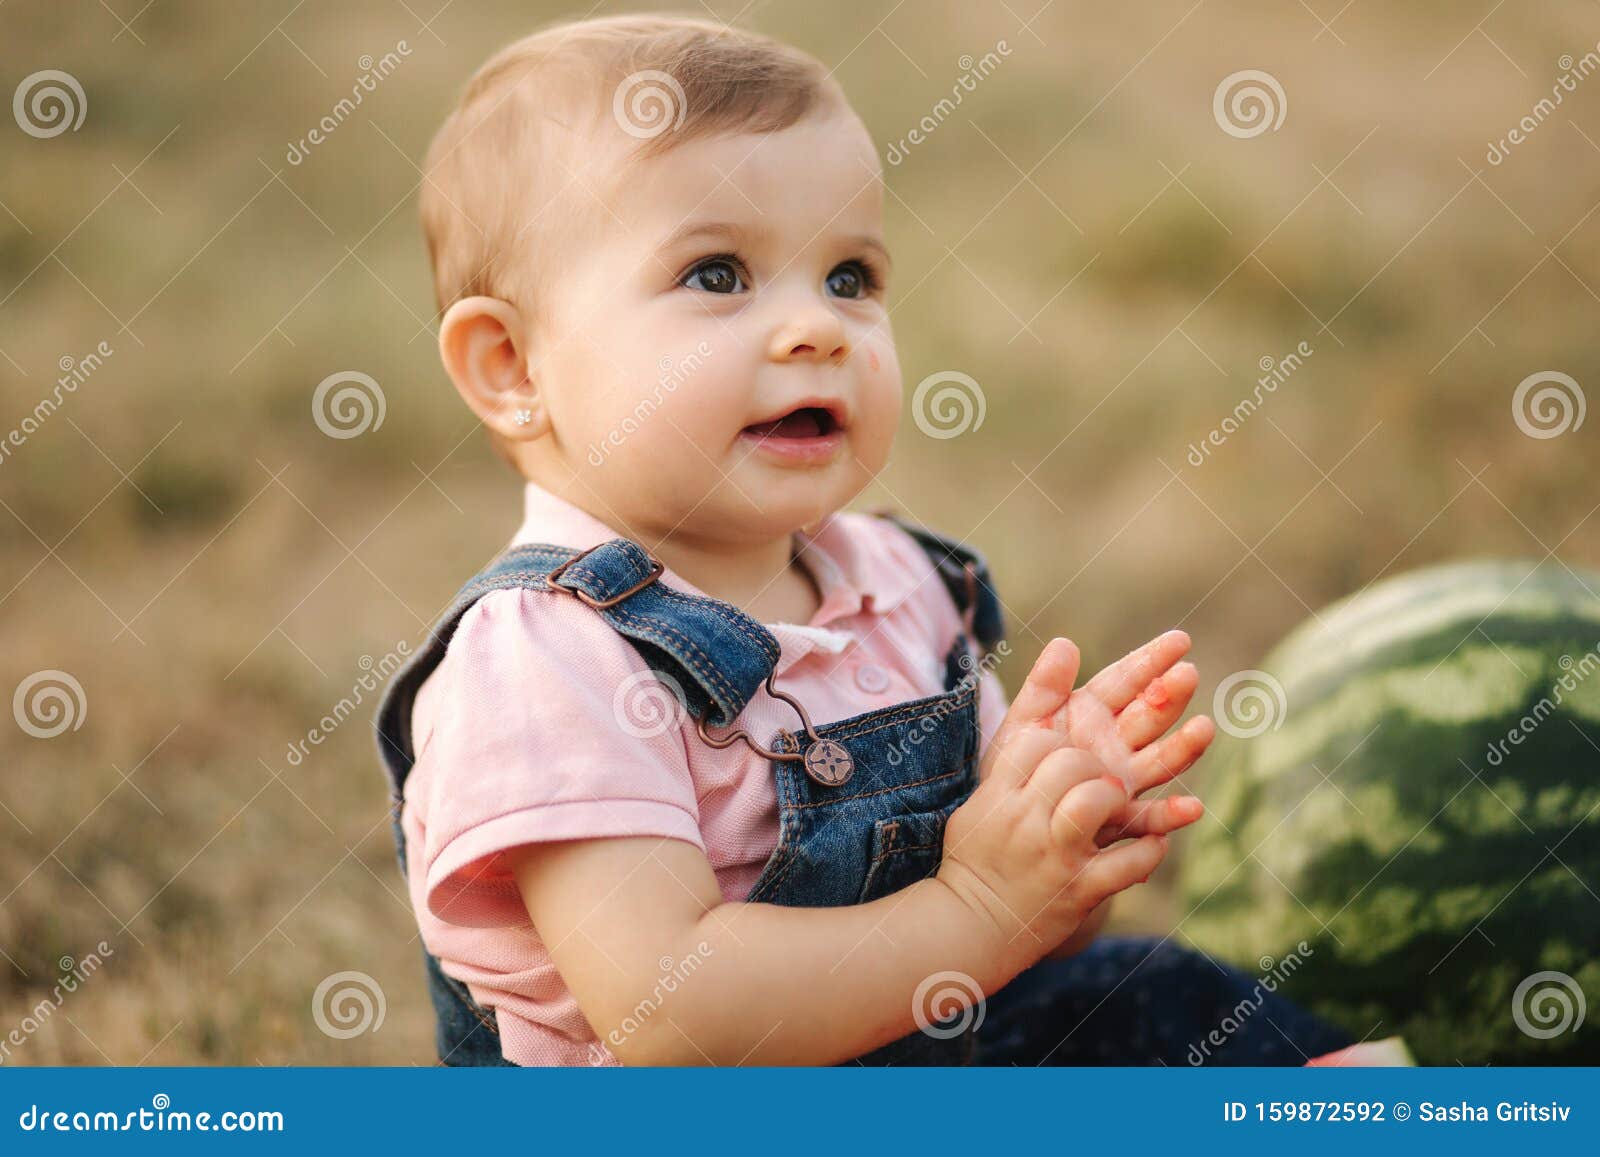 Close Up Of Adorable Baby Girl Eat Watermelon Stylish Baby In Denim Dress Beautiful Child Eat Fruit Outdoors Stock Photo Image Of Backyard Eating